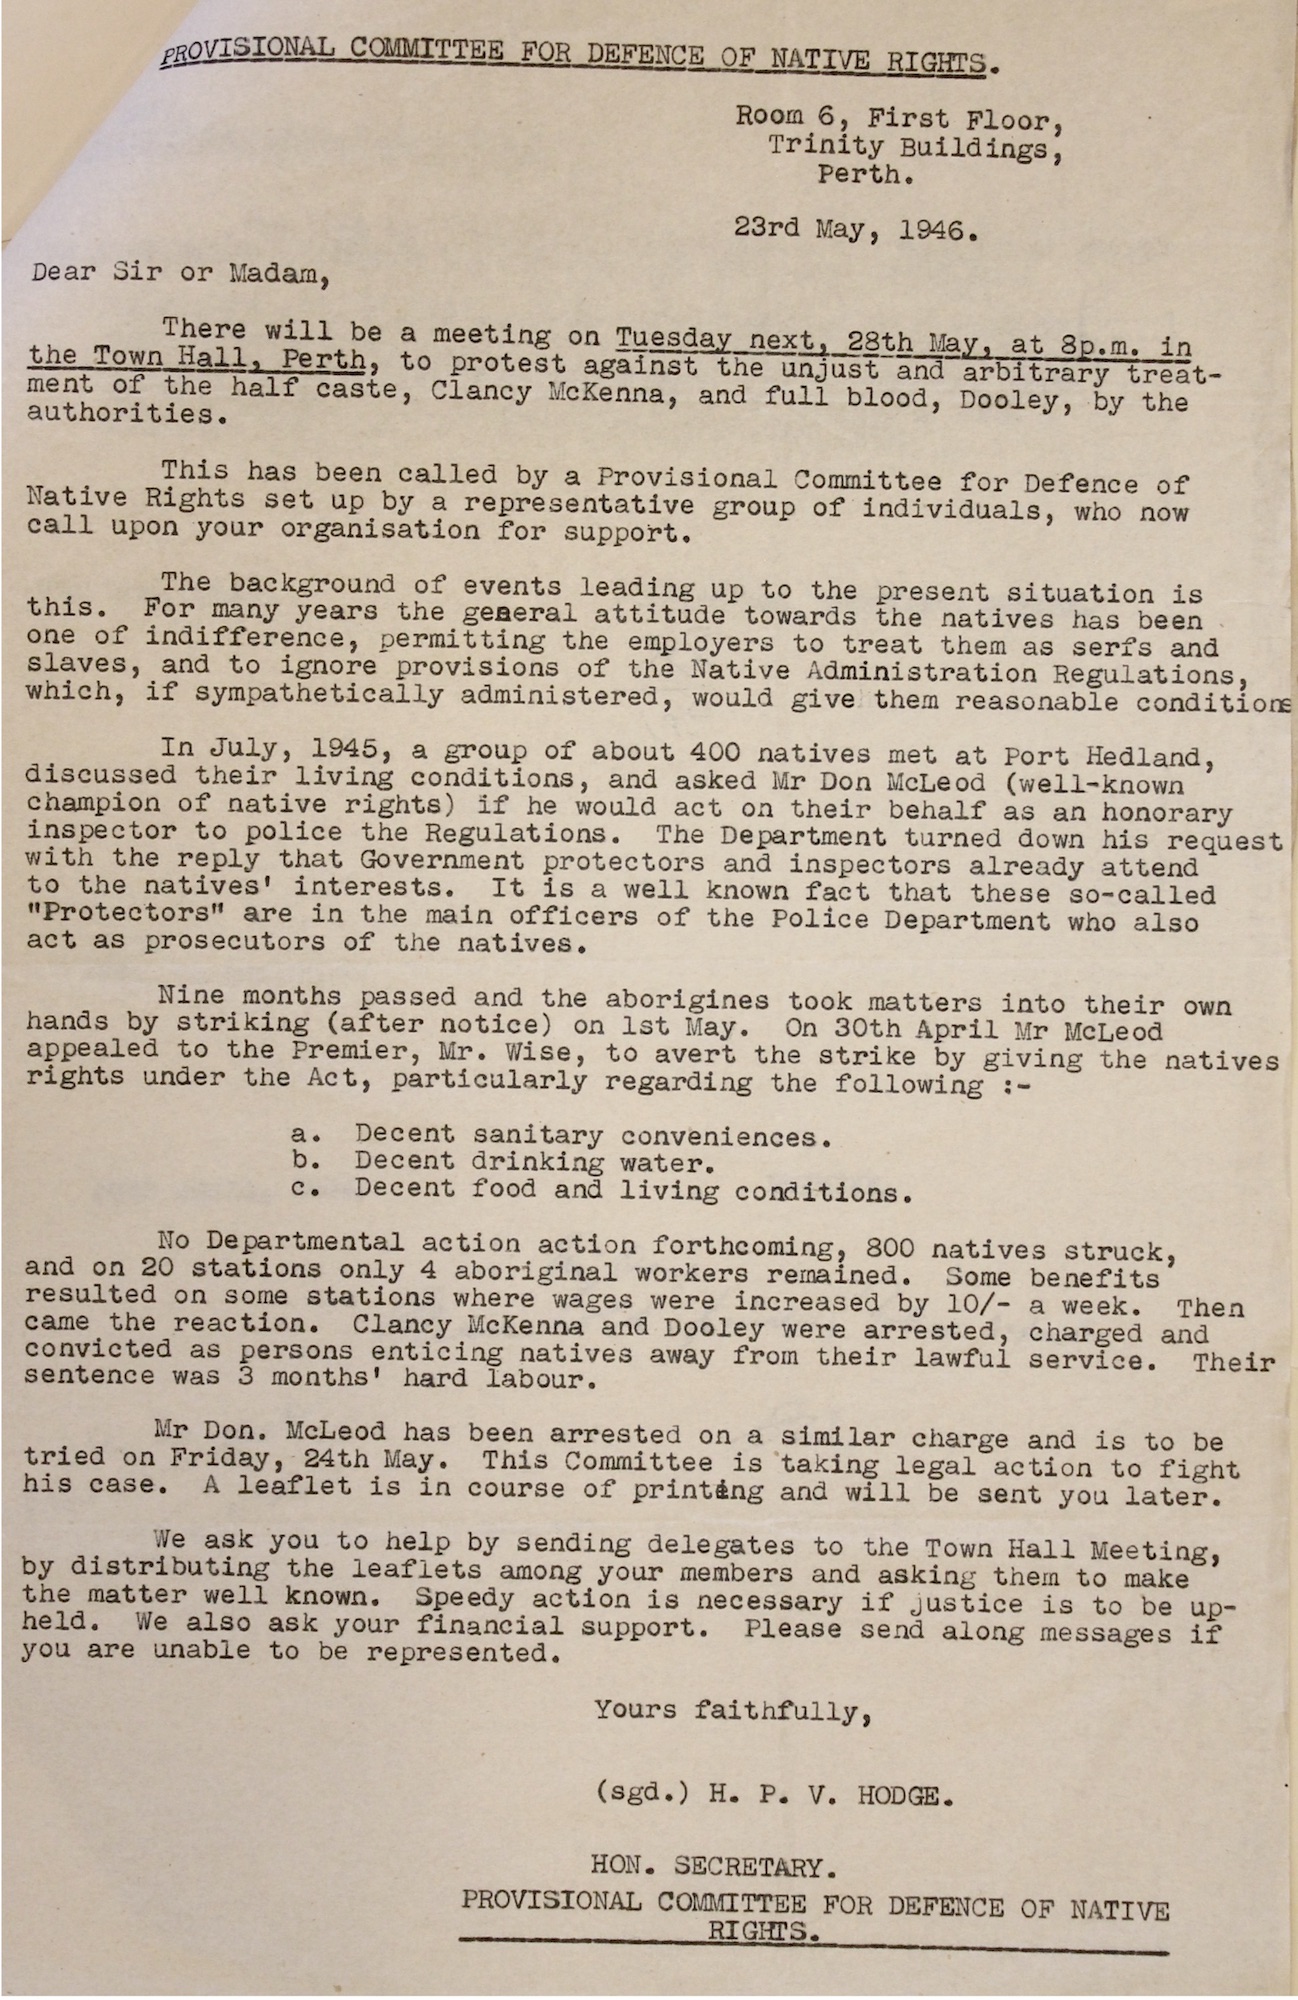 Committee for Defence of Native Rights Circular, 1946